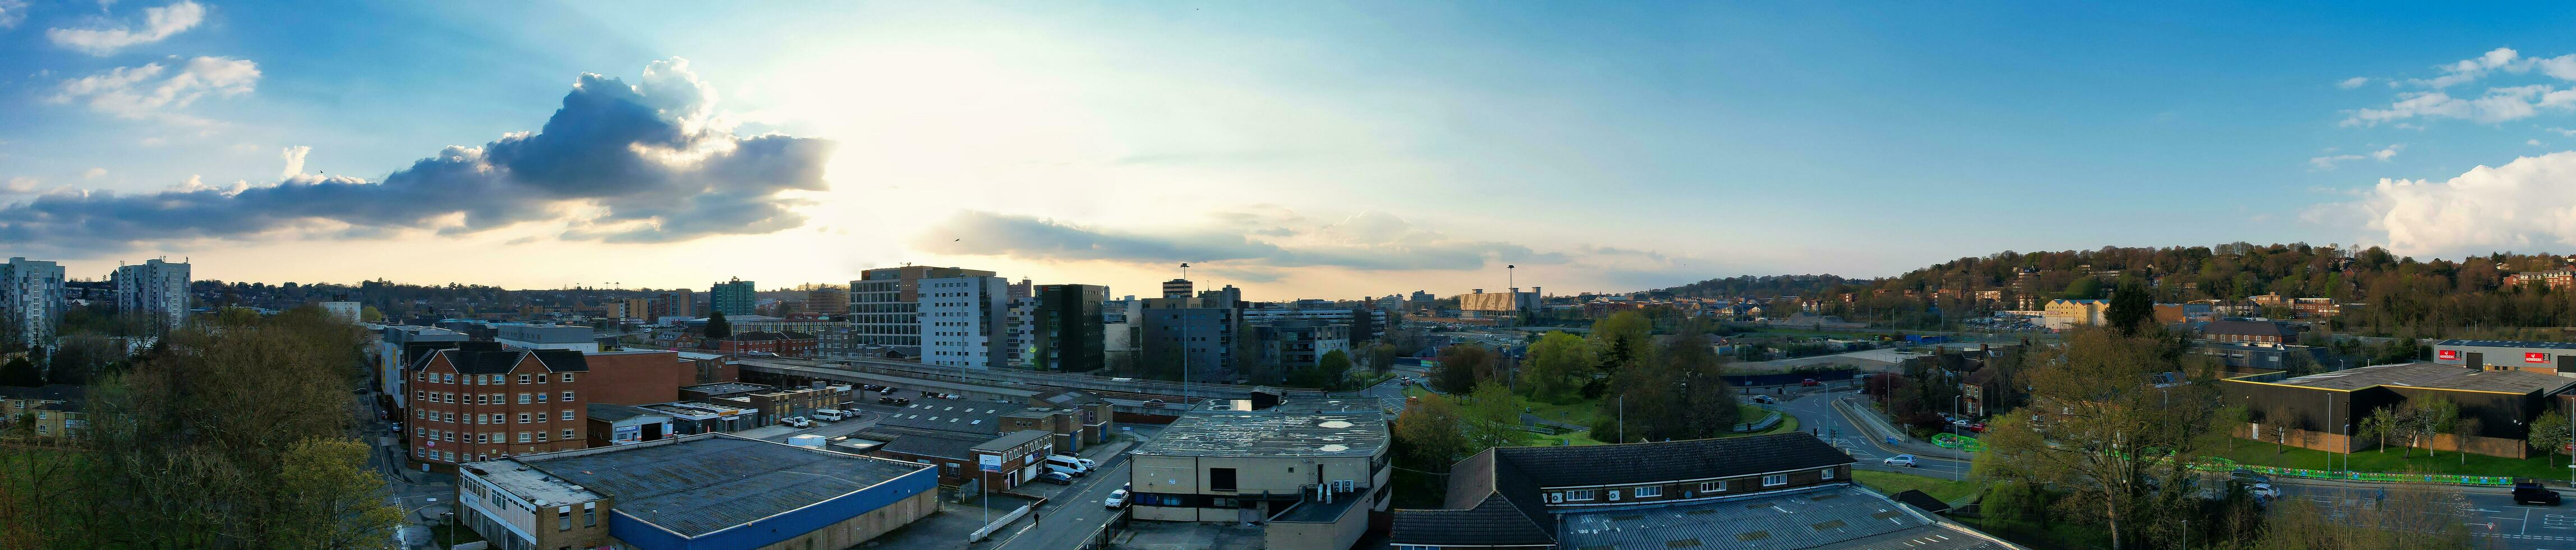 Ultra Wide Panoramic High Angle View of Luton City of England. Aerial View of Town was Captured on 17-April-2023 with Drone's Camera from Low Altitude. photo